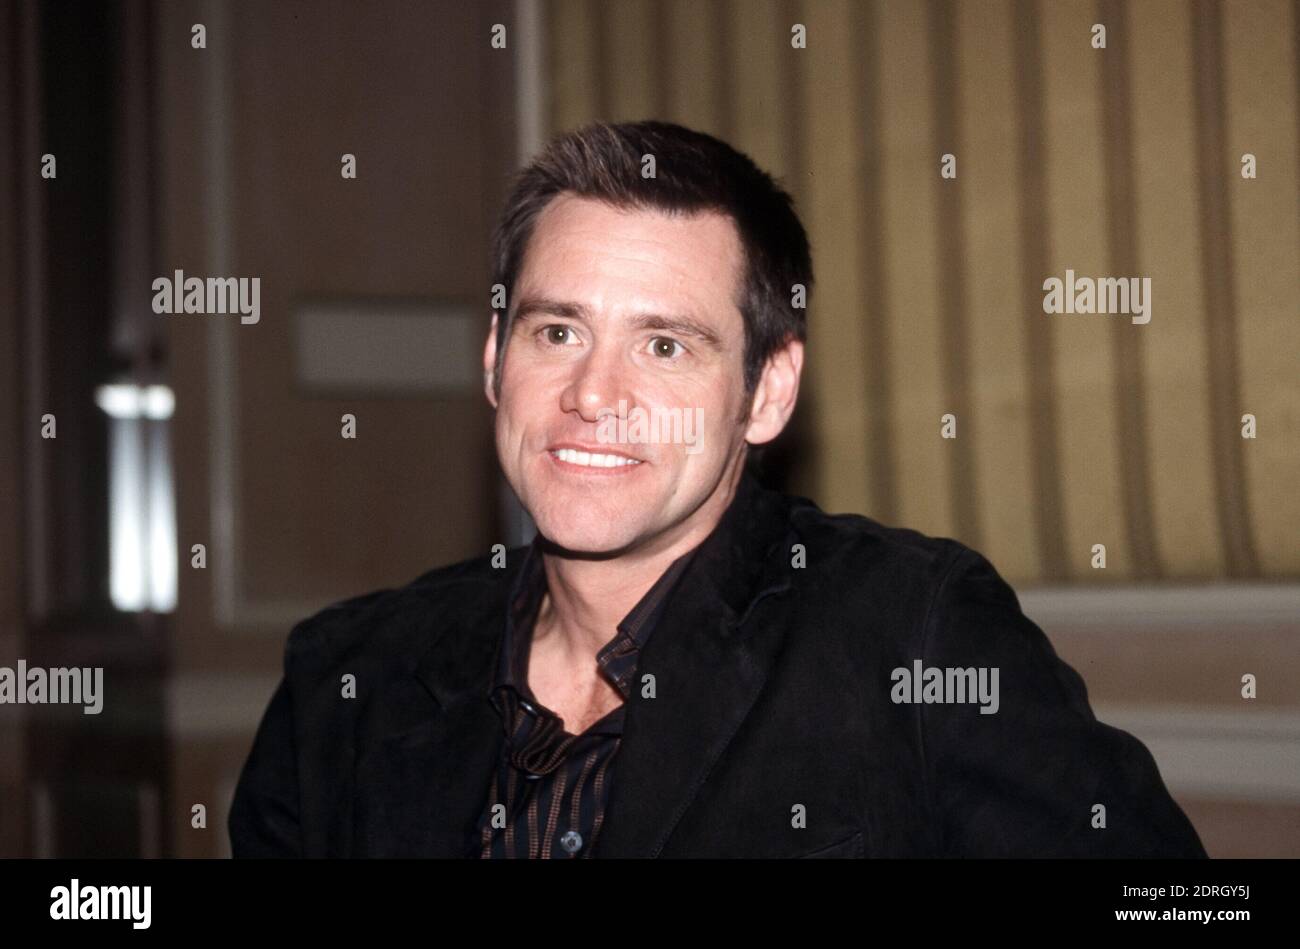 Star of 'Lemony Snicket's A Series of Unfortunate Events,' Jim Carrey, circa 2004 / File Reference # 34000-1530PLTHA Stock Photo